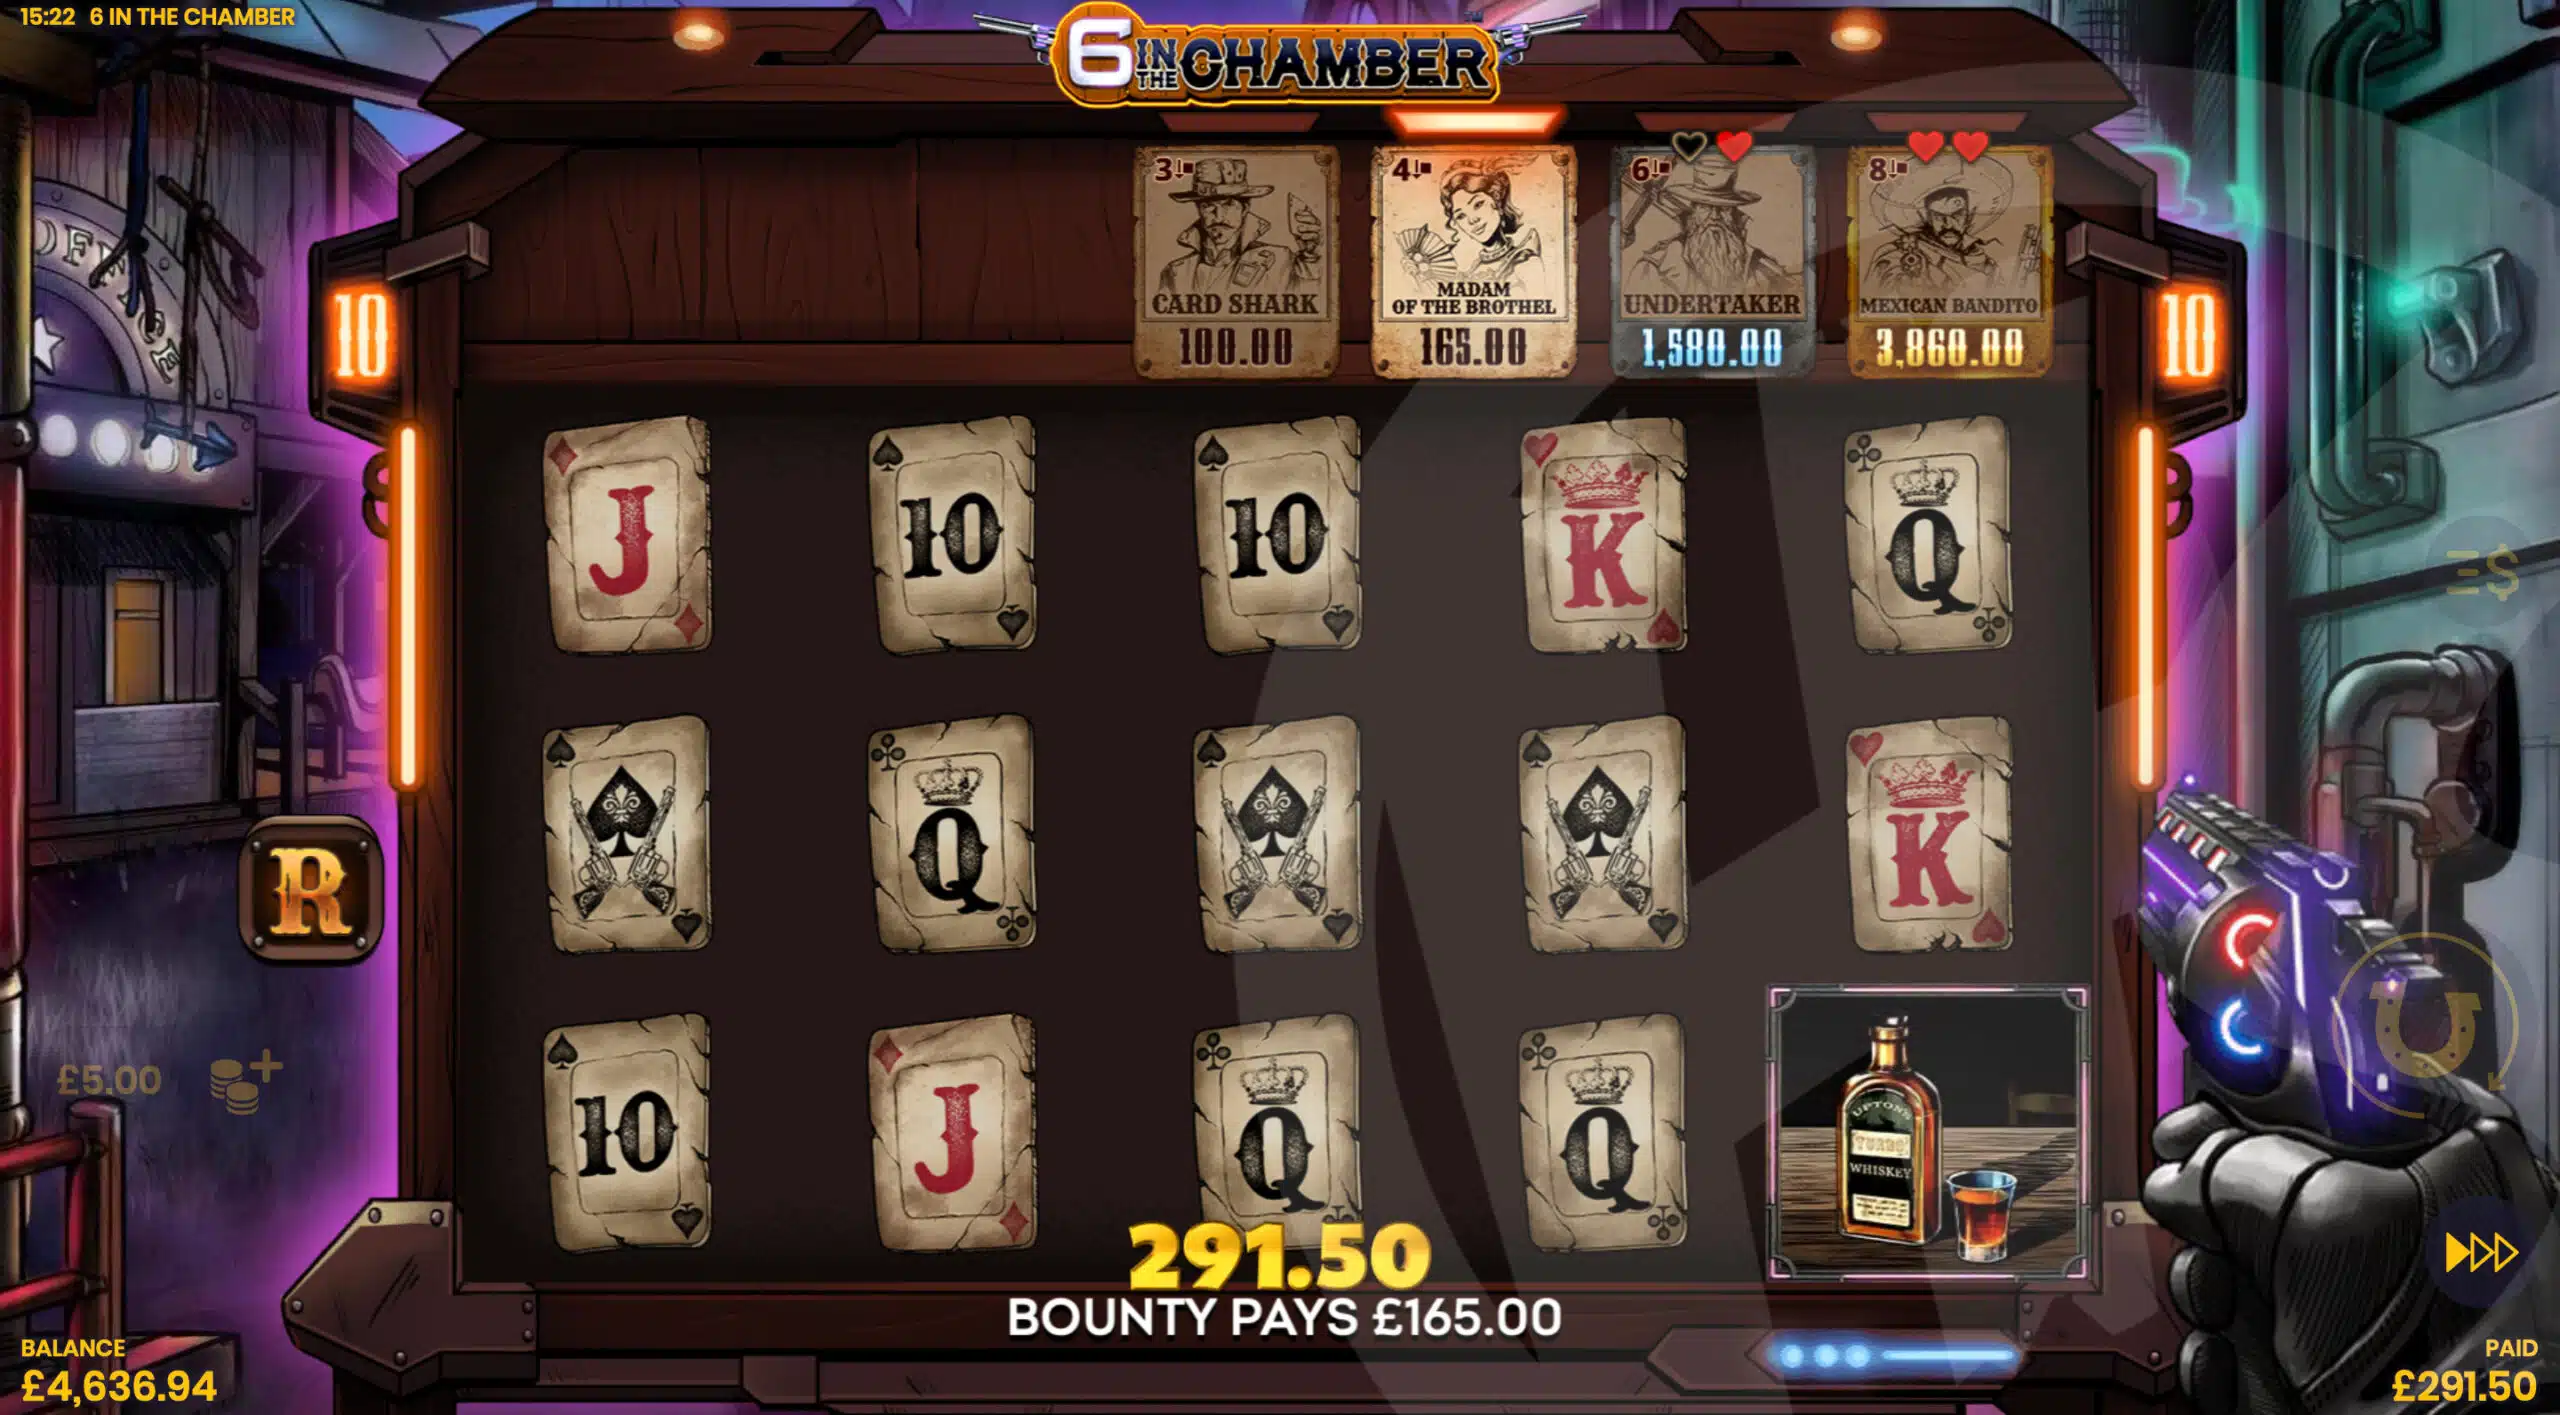 6 In The Chamber Free Spins - Rookie Mode